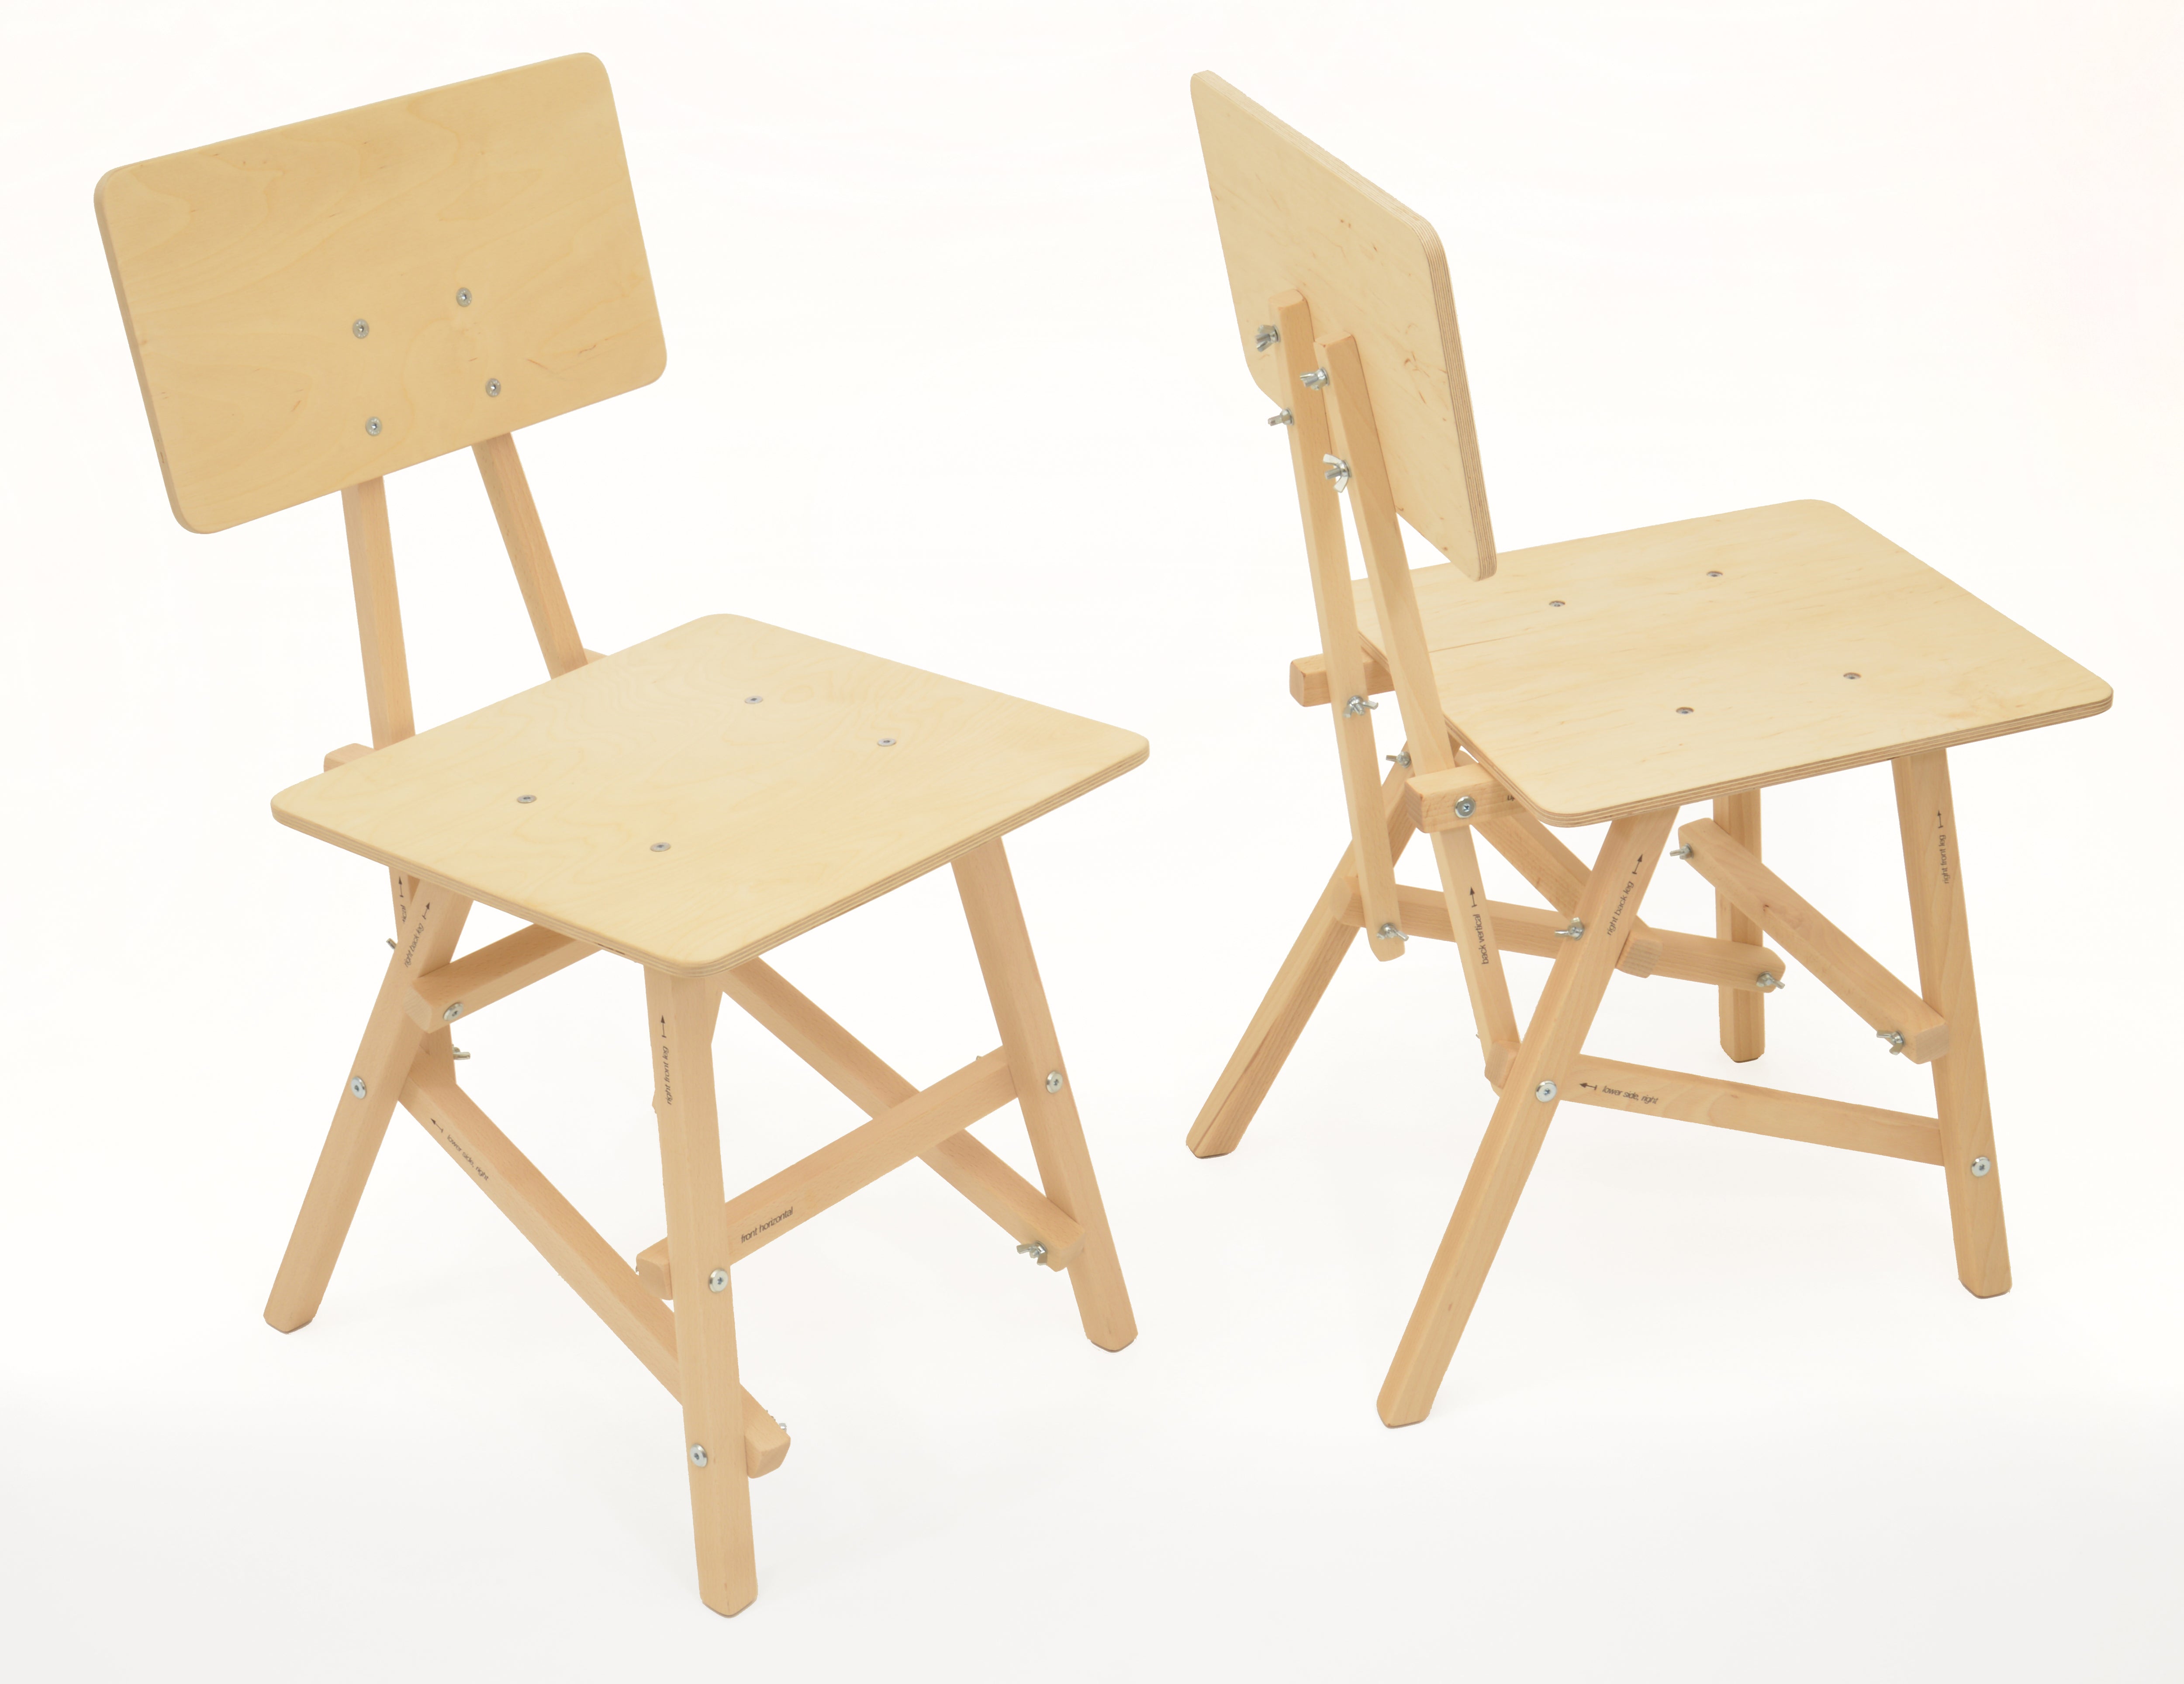 DIT Chair, wooden chair, front and back view. Self assembly, beech and plywood. Design by Tord Boontje.